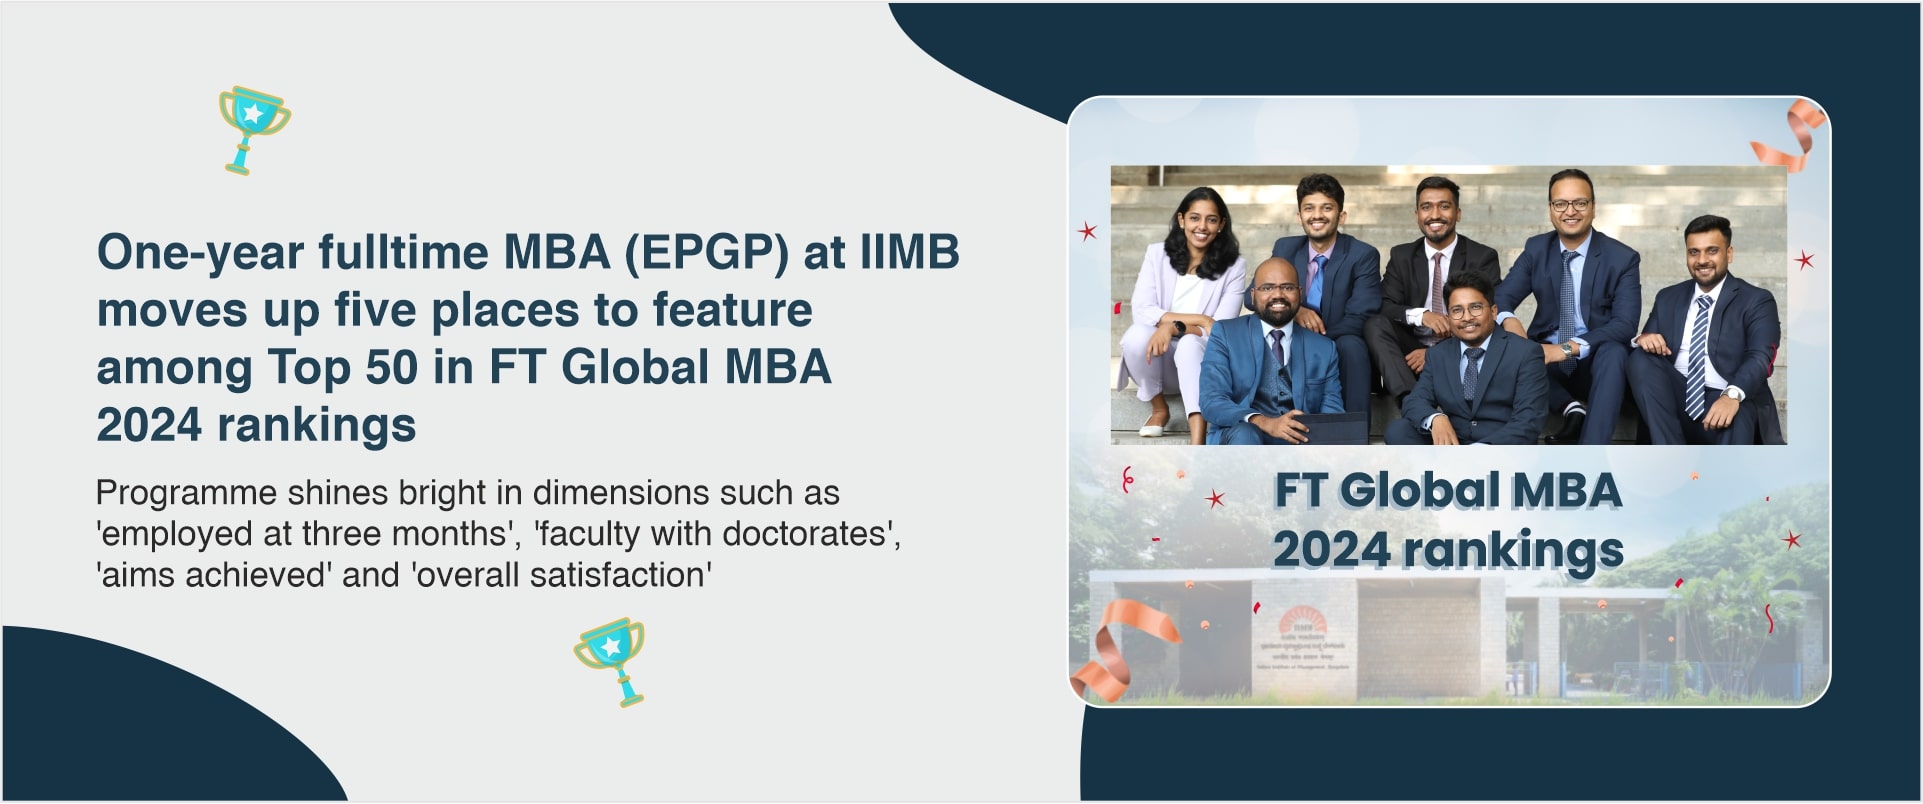 One-year fulltime MBA (EPGP) at IIMB moves up five places to feature among Top 50 in FT Global MBA 2024 rankings 